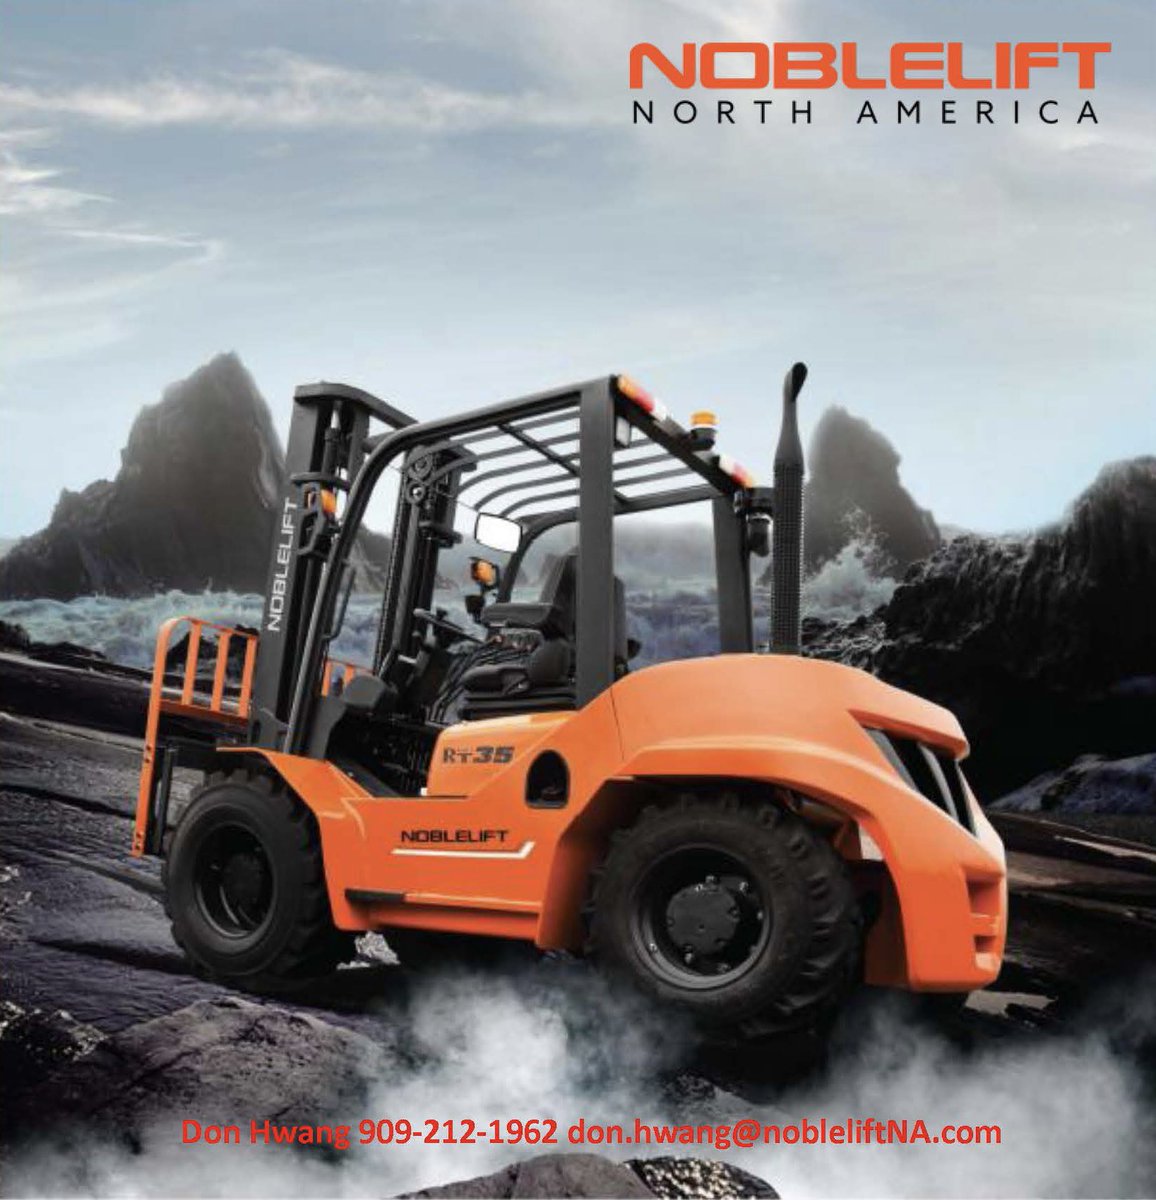 The all new FD4RT Series 5-7K Rough Terrain 2WD/4WD Tier 4 56hp Diesel Forklift 3 year 6000hr Warranty. Get your orders in for the new year 2023. 909-212-1962 Don.hwang@nobleliftna.com #noblelift #roughterrainforklift #forklift #allterrainforklift #dieselforklifts #lumberyards